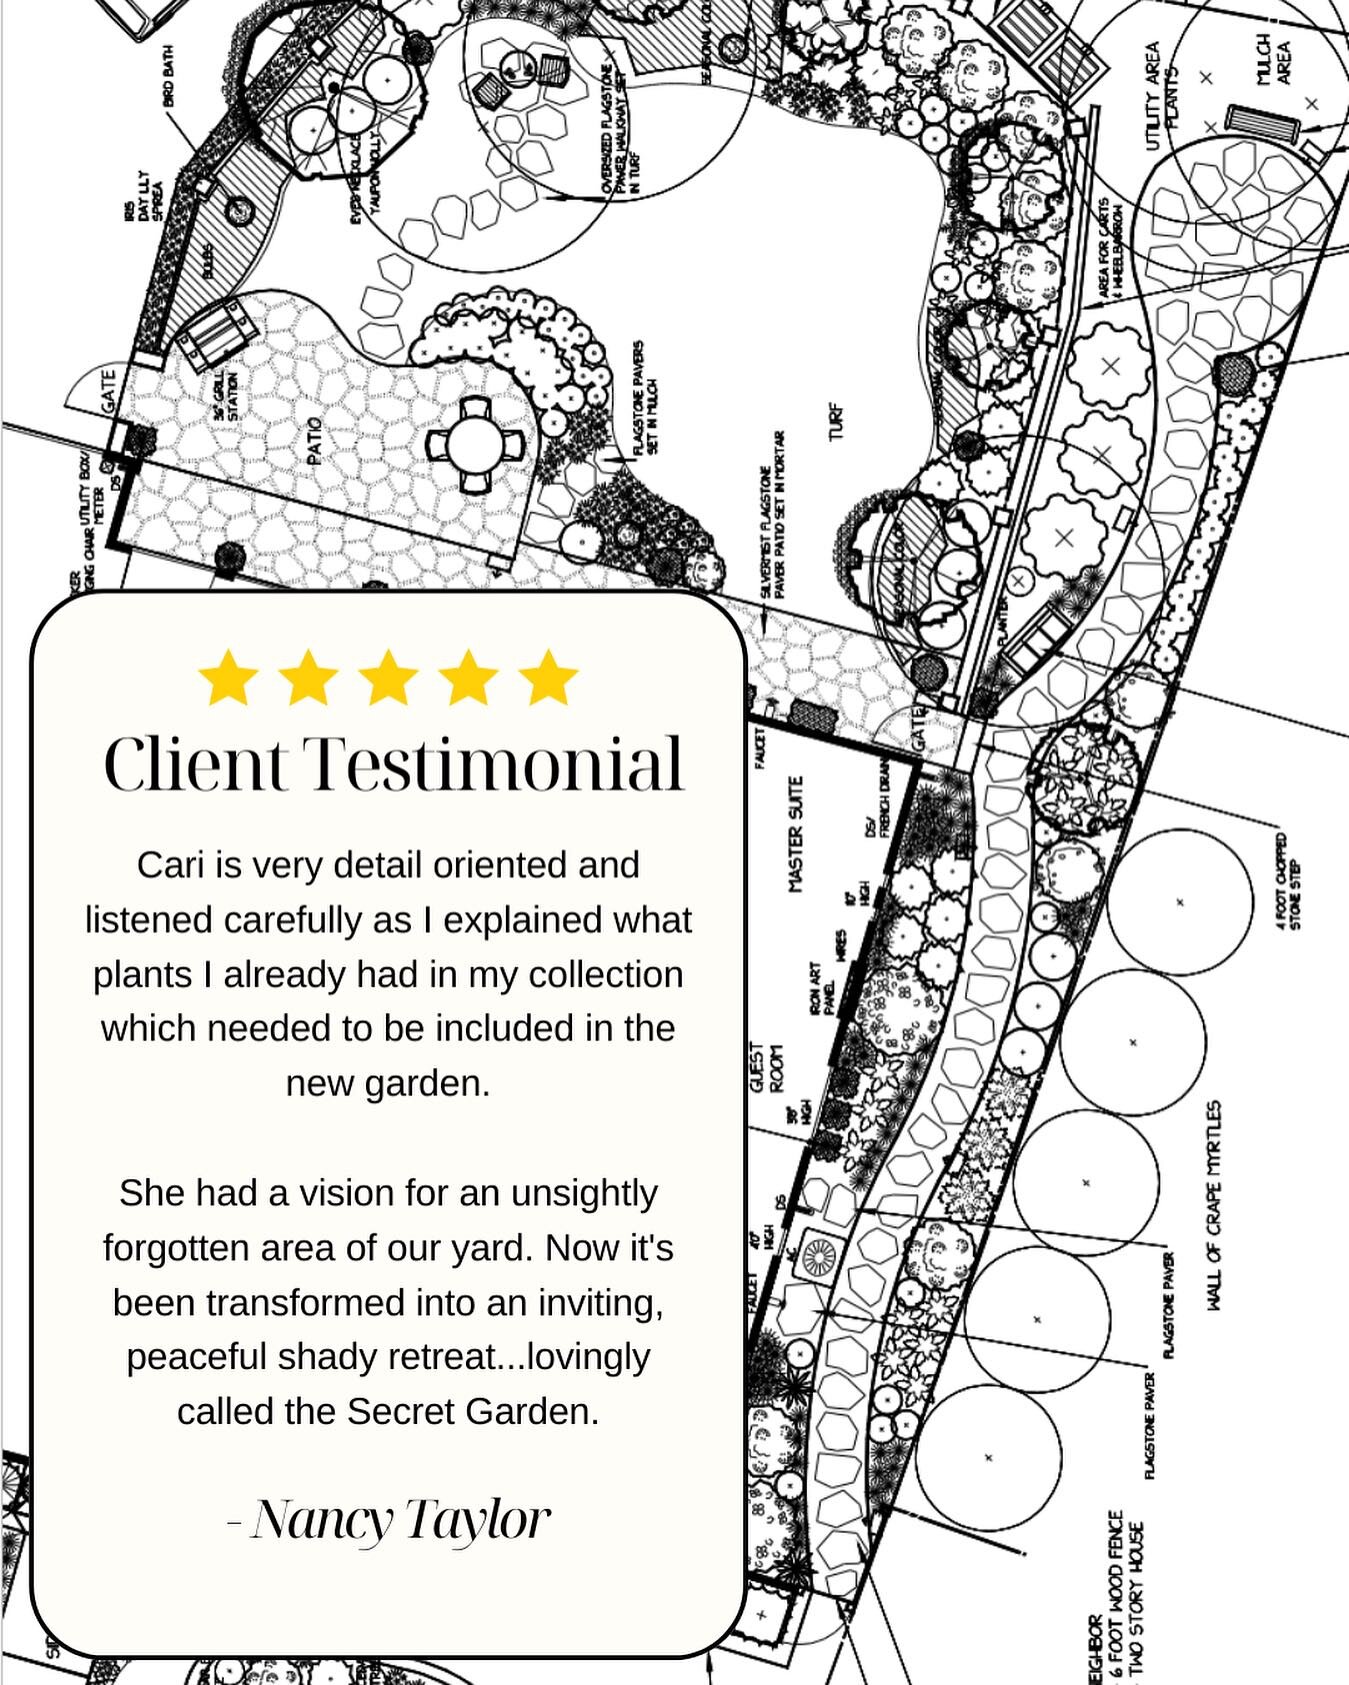 Client Testimonial Day!

I was blessed to work with another Master Gardener on a landscape design for her new home.  Nancy has always been a mentor to me, as she taught me about hundreds of plants as interns together while always answering my questio